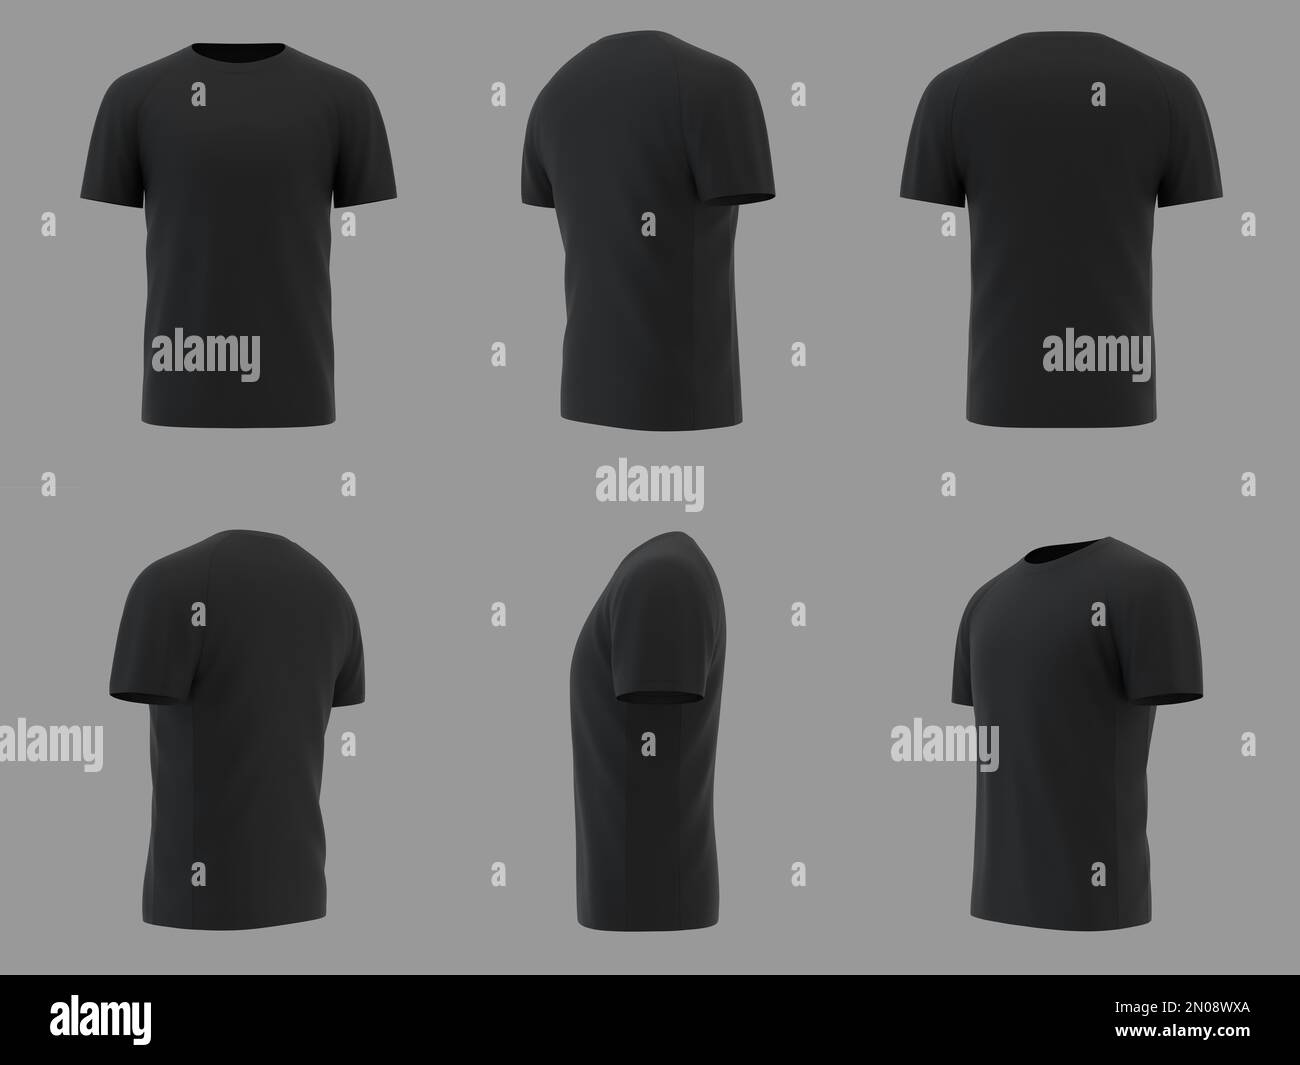 Blank black shirt mockup template, front and back view, isolated on white  plain t-shirt mockup. Sweater t-shirt design presentation for printing  Stock Photo - Alamy